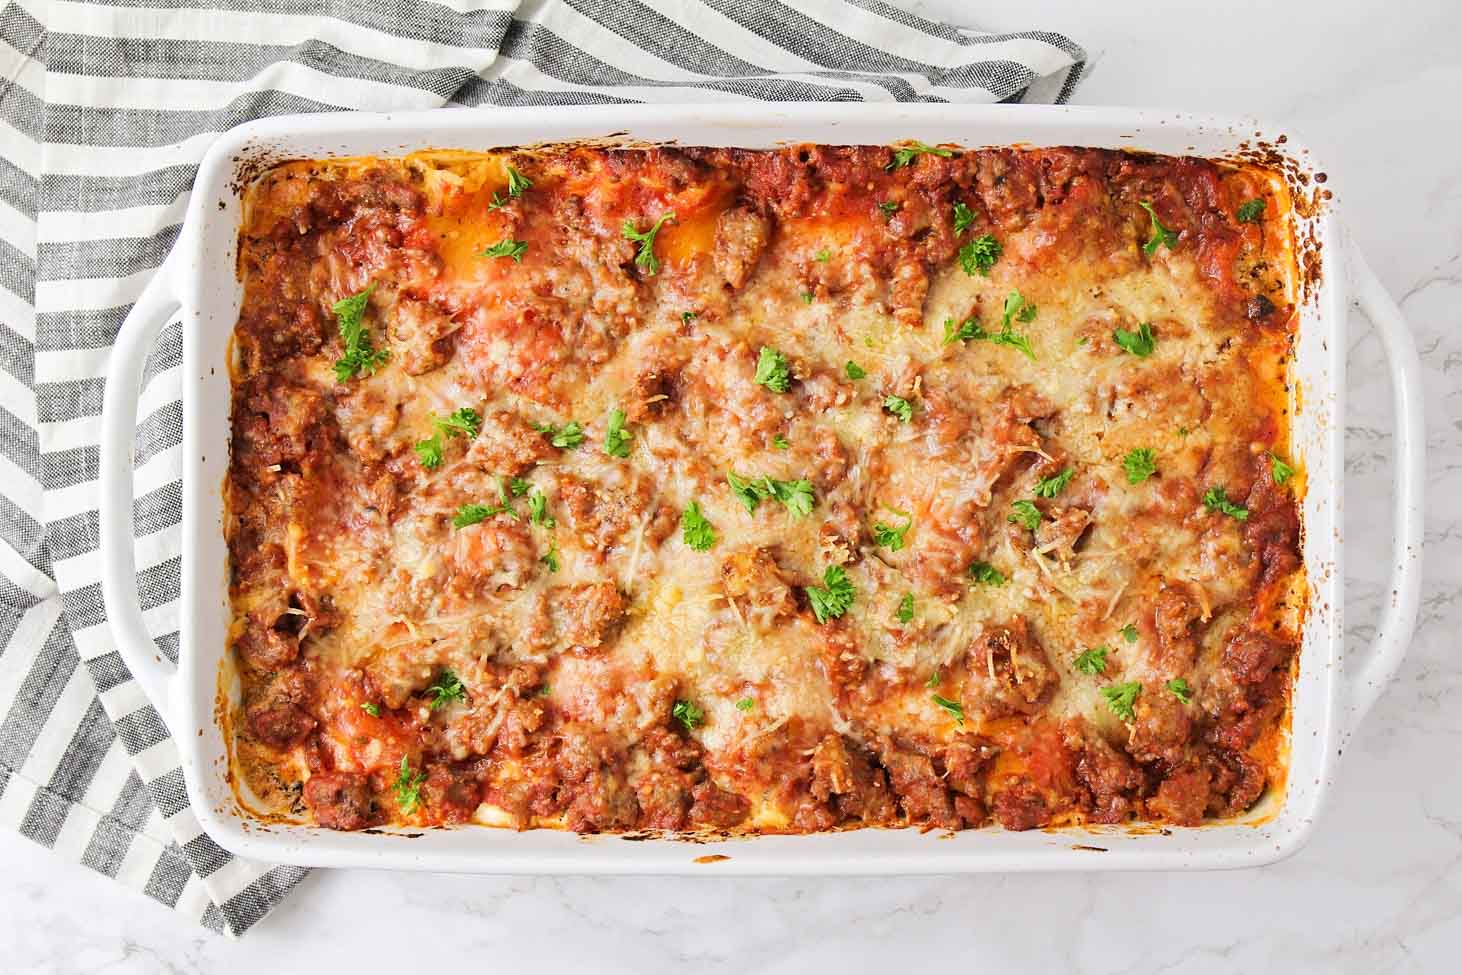 Sunday Dinner Ideas - Easy lasagna recipe served in a white casserole dish topped with fresh herbs.